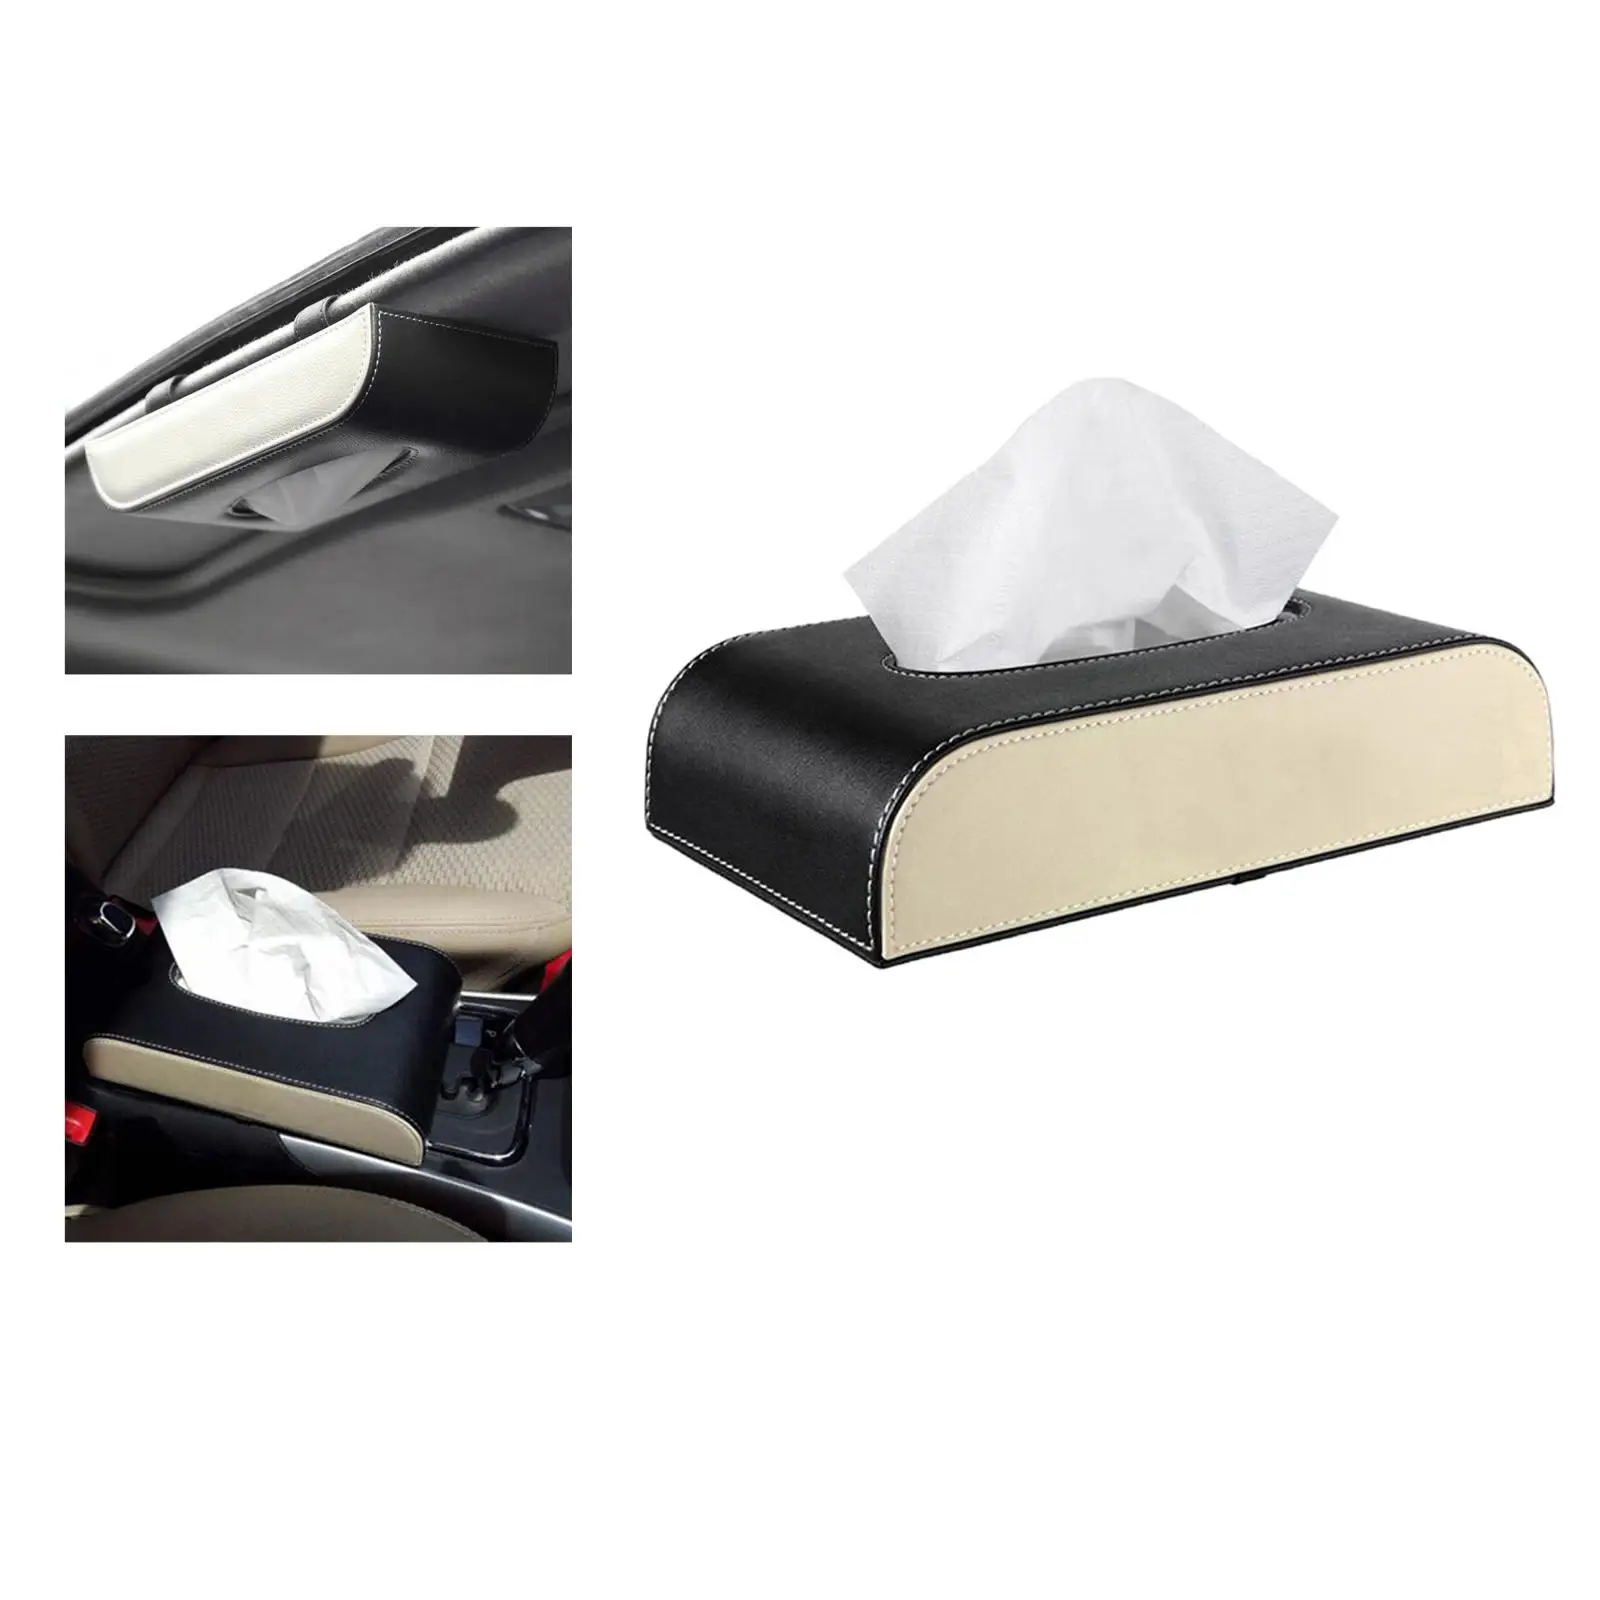 Auto PU Leather Paper Towel Case Tissue Box Paper Storage for Home Office